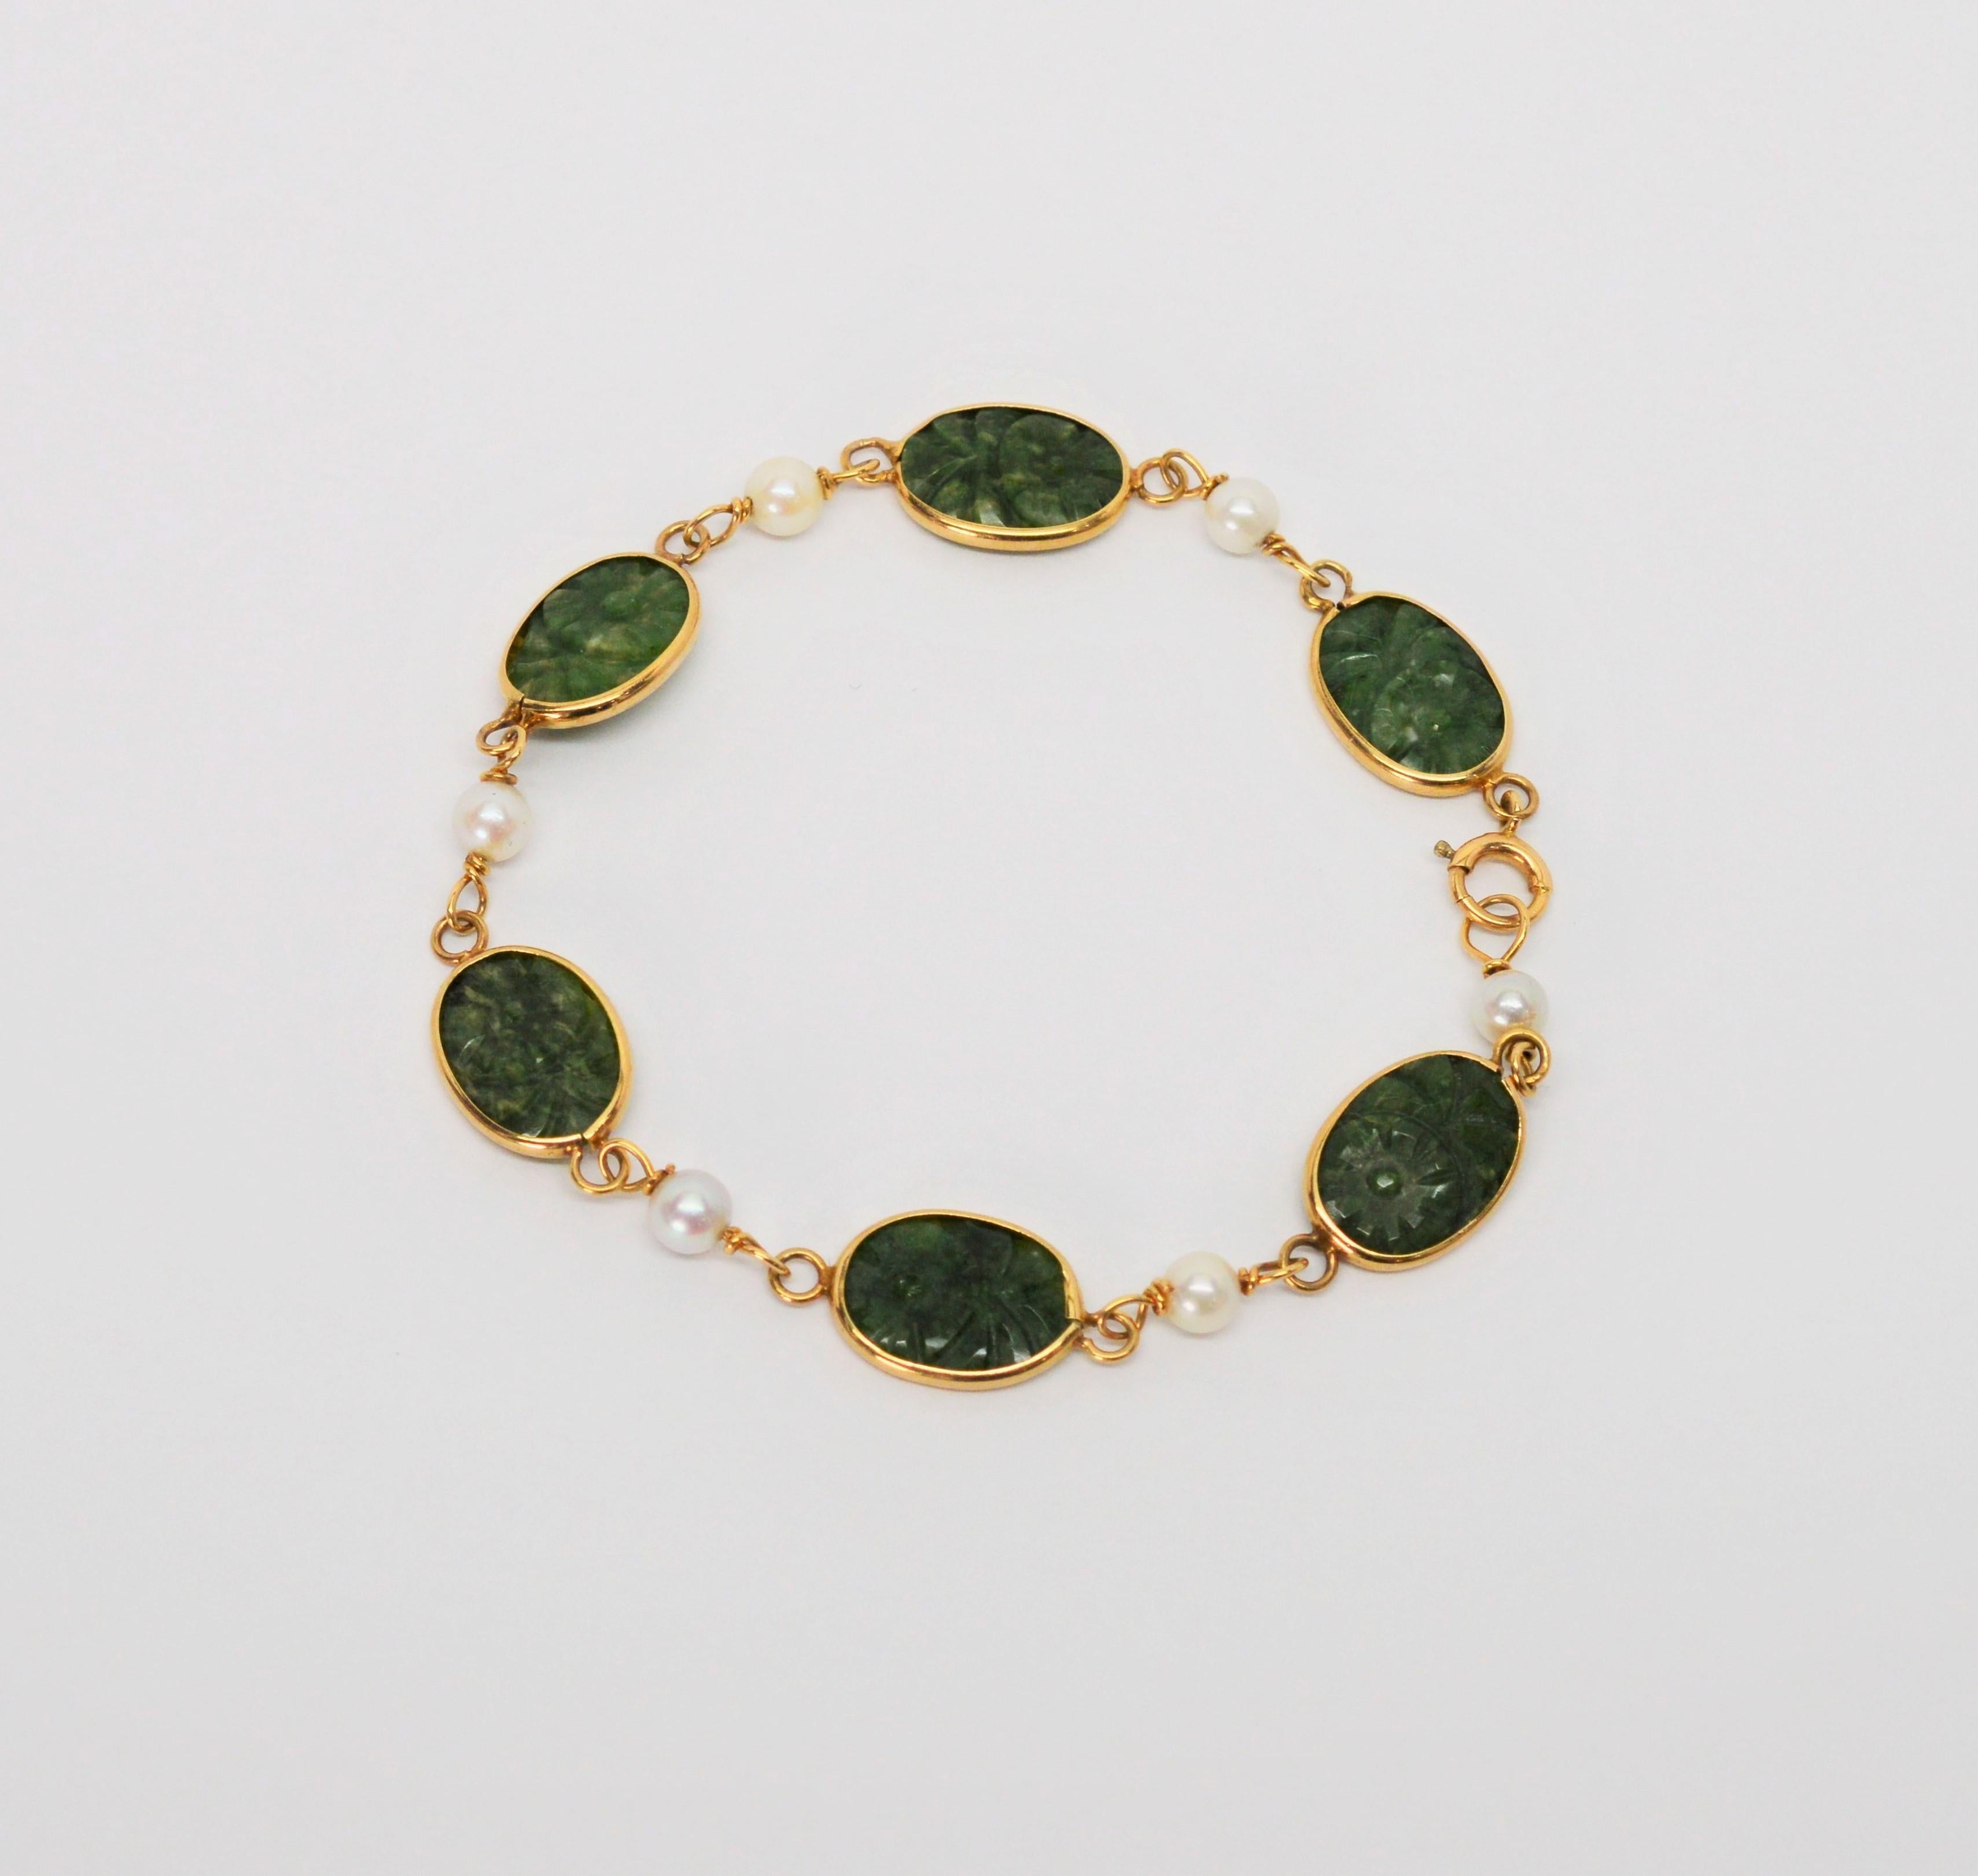 Beautifully hand carved jade plackets bezel set in ten karat (10K) yellow gold create unique links on this attractive bracelet. Lustrous white peals are placed between the oval shaped jade links accenting the natural beauty of both materials. Eight